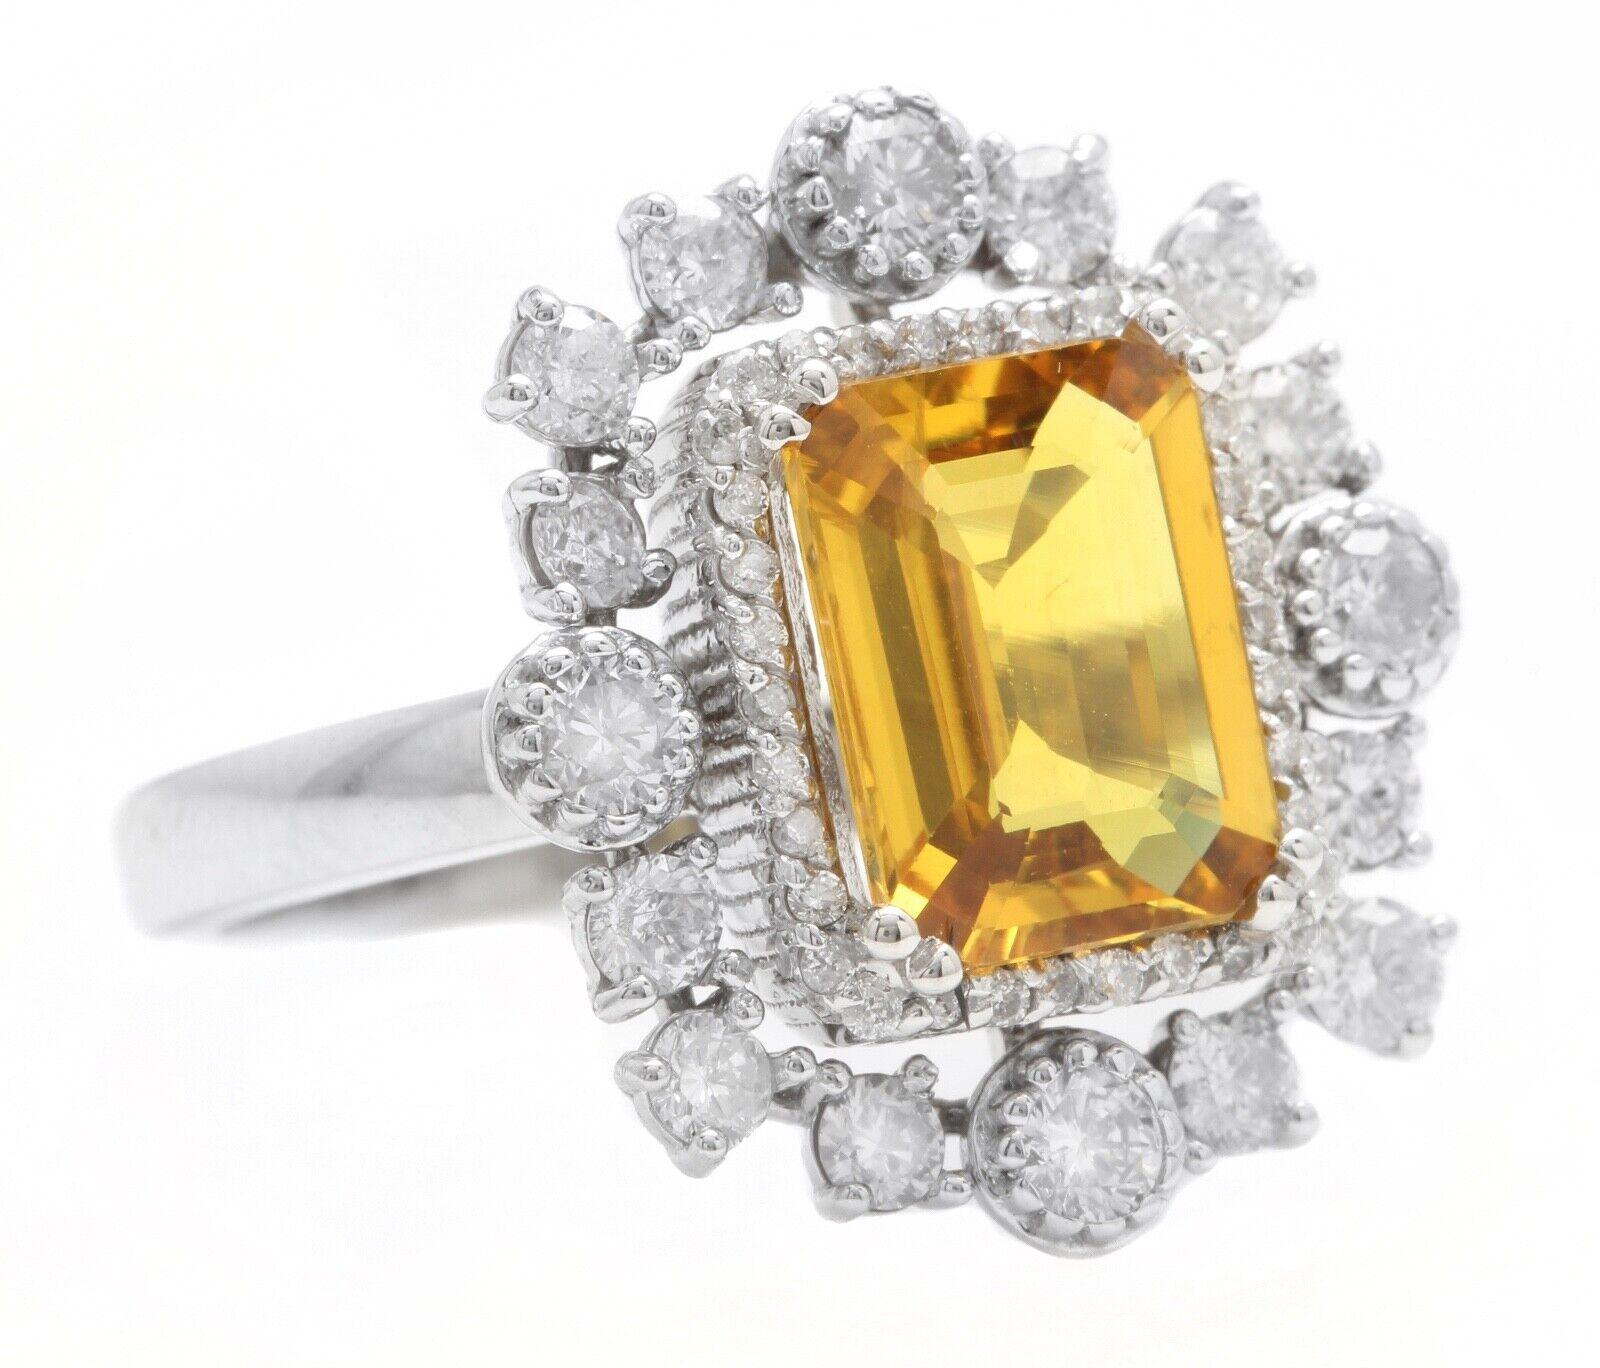 4.10 Carats Exquisite Natural Yellow Sapphire and Diamond 14K Solid White Gold Ring

Suggested Replacement Value $8,000.00

Total Yellow Sapphire Weight is: Approx. 3.10 Carats 

Sapphire Treatment: Heat

Sapphire Measures: Approx. 10.00 x